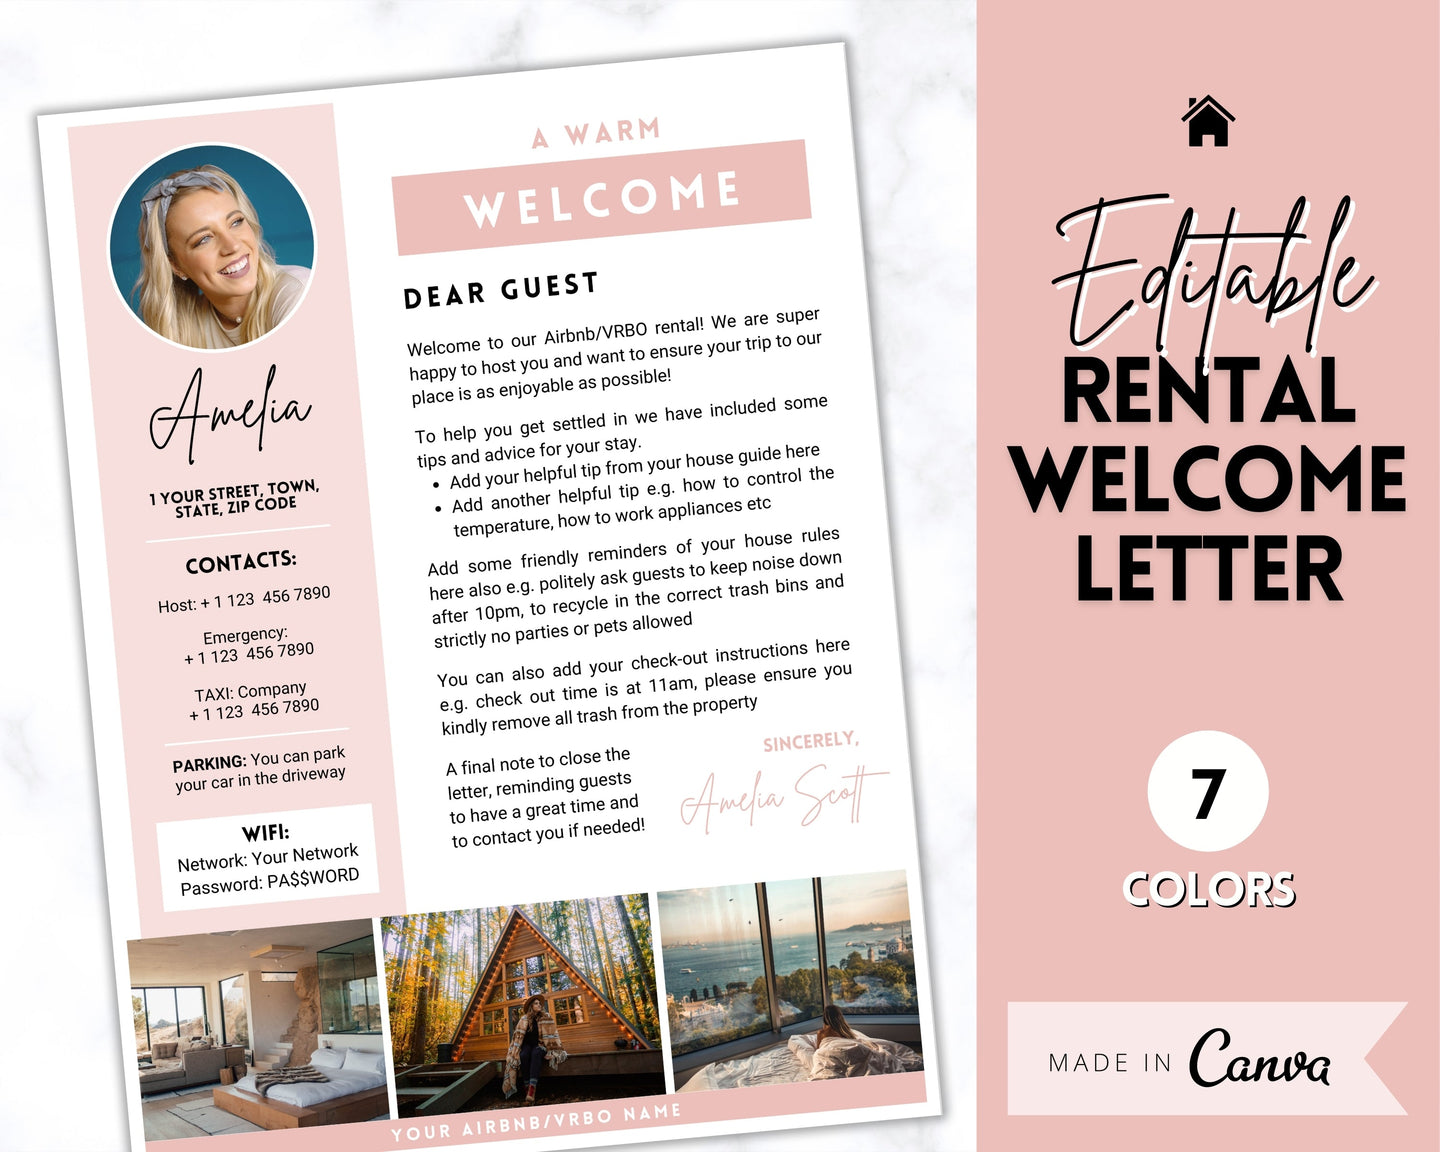 Welcome LETTER Template, Airbnb & VRBO, Editable Canva Air bnb House manual, Superhost eBook, Host signs, Signage, Vacation Rental Guide